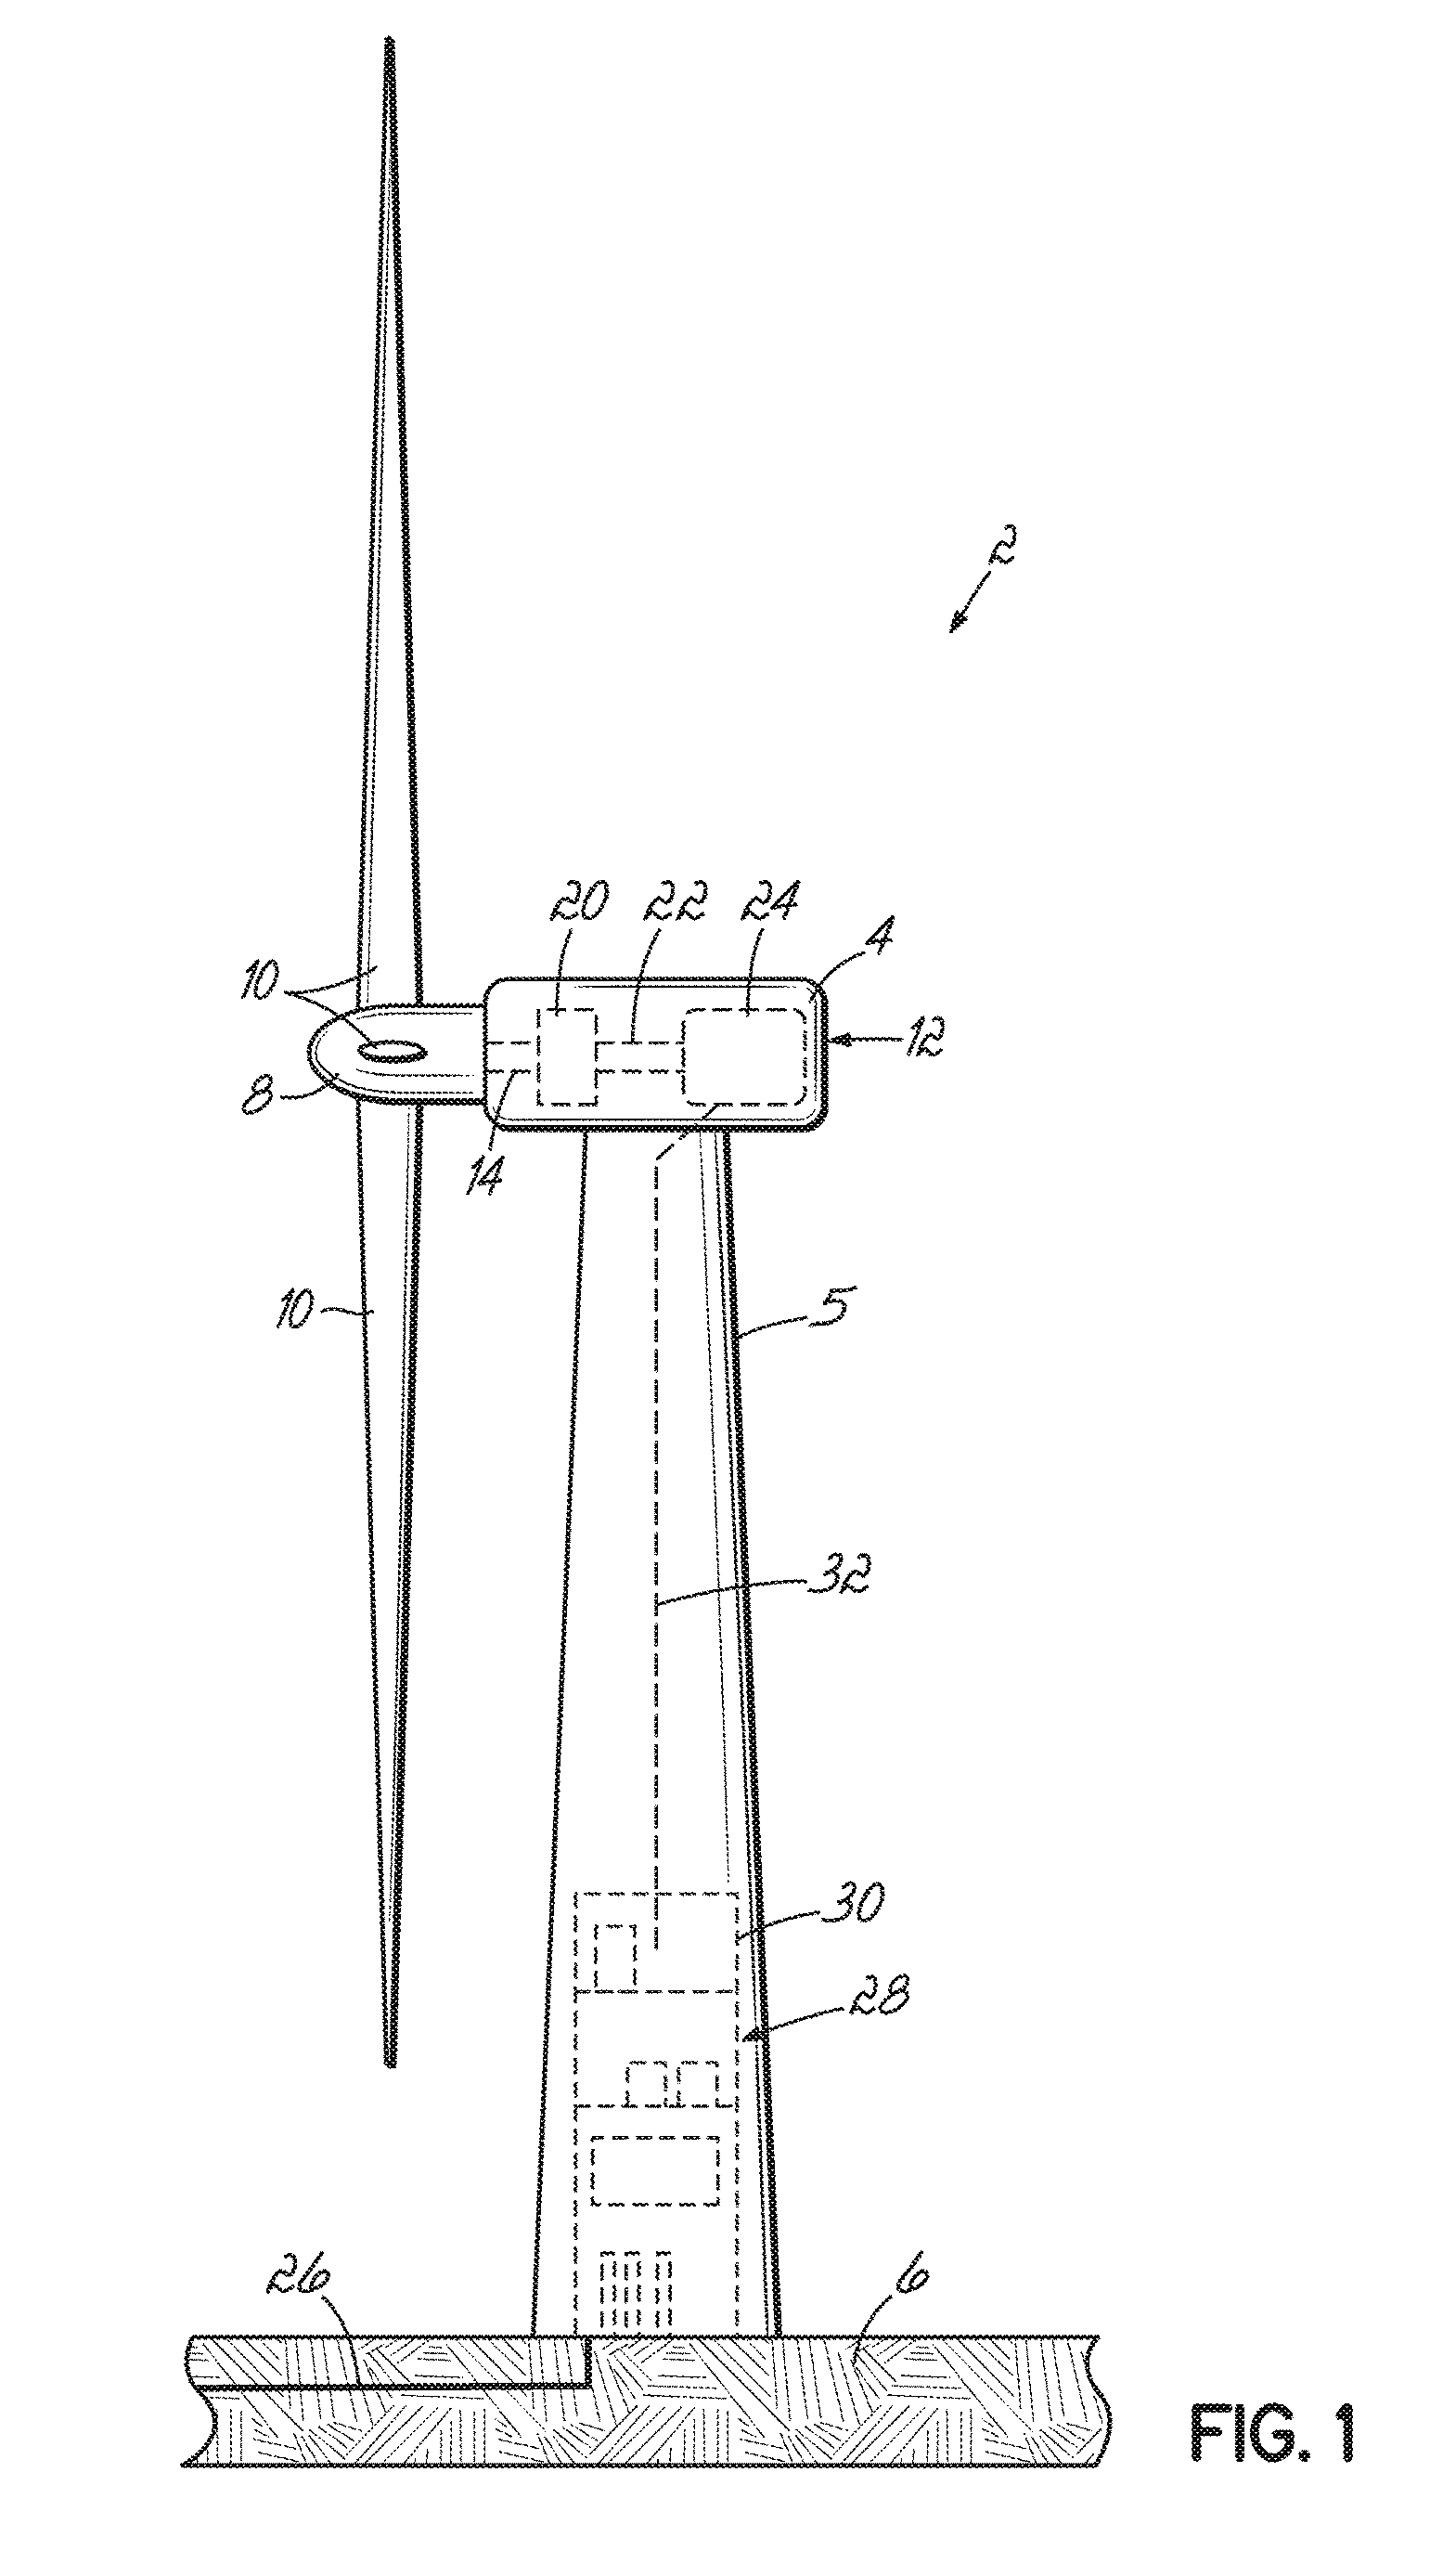 A nacelle for a wind turbine generator including lifting apparatus